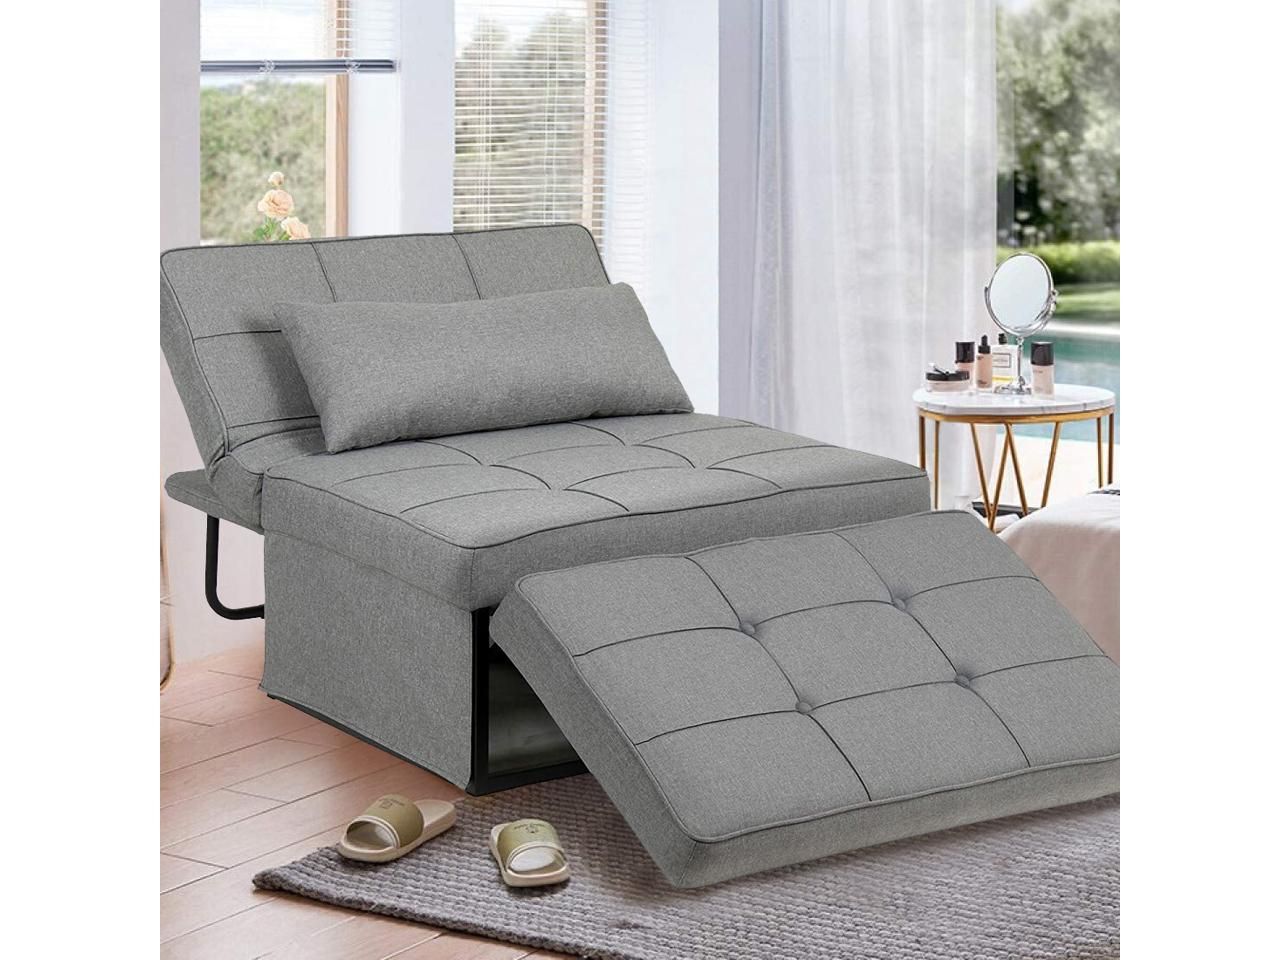 Most Popular Googic Sofa Bed, Convertible Chair 4 In 1 Multi Function Folding Pertaining To Light Gray Fold Out Sleeper Ottomans (View 4 of 10)